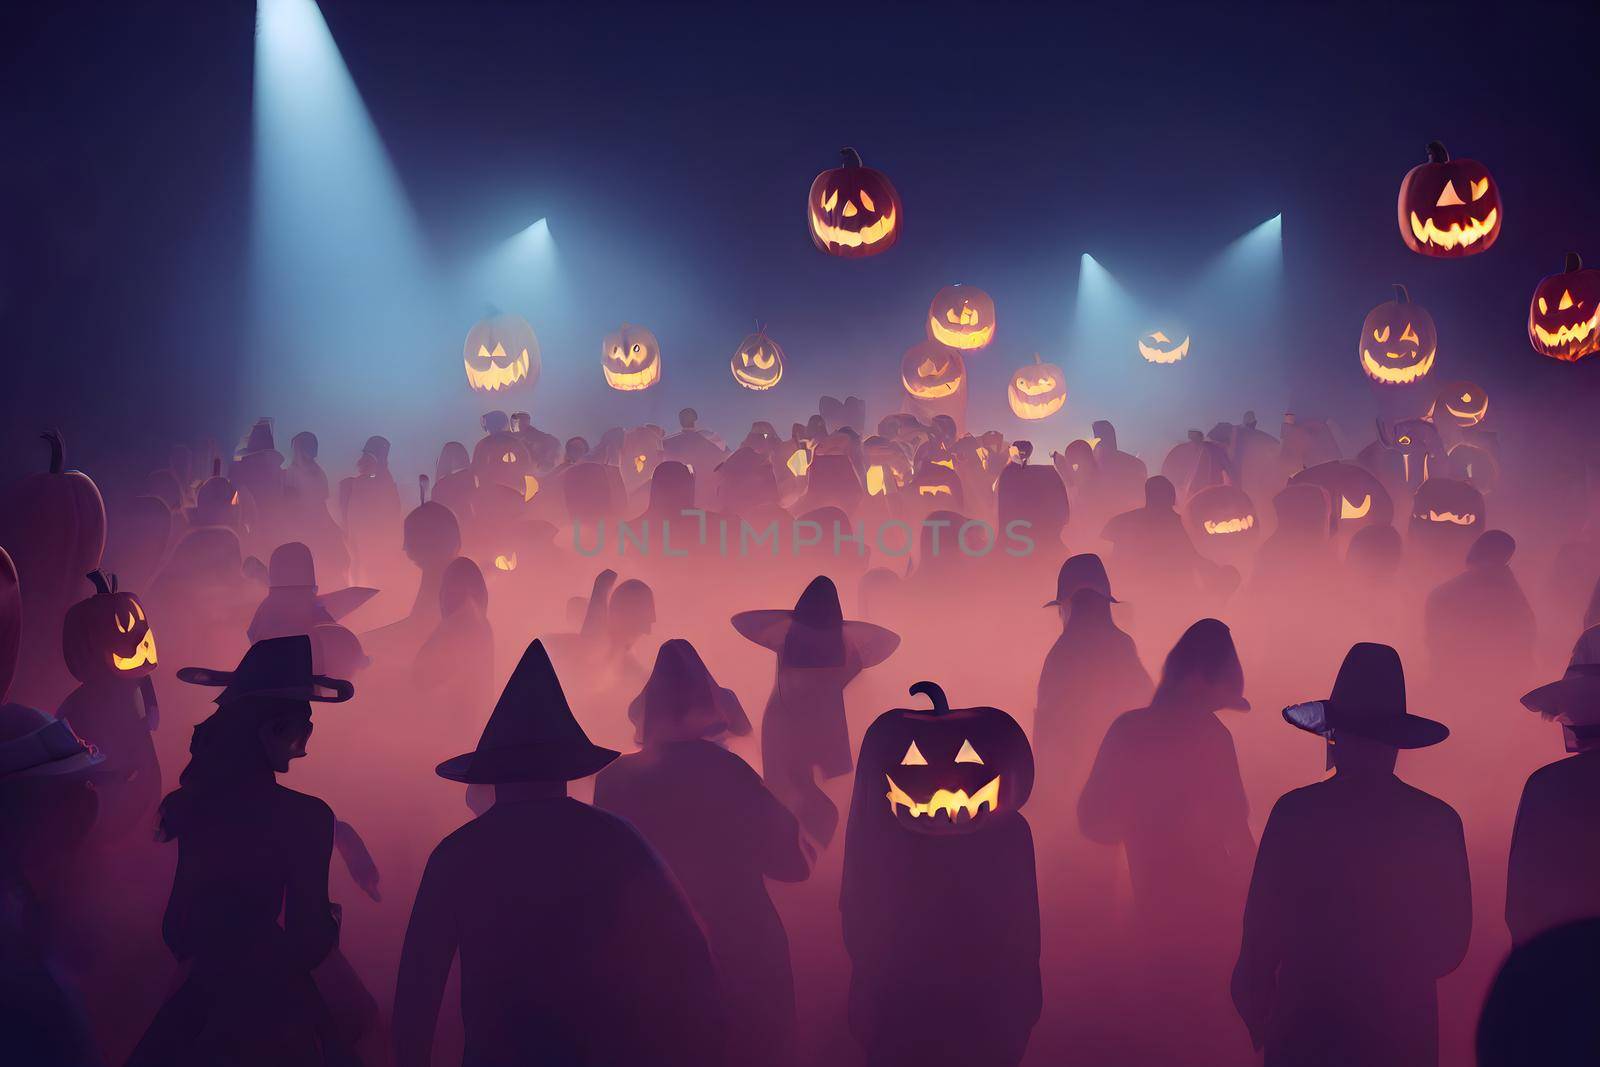 massive halloween party with many unrecognizable costumed people dancing in fog or smoke, neural network generated art. Digitally generated image. Not based on any actual scene or pattern.